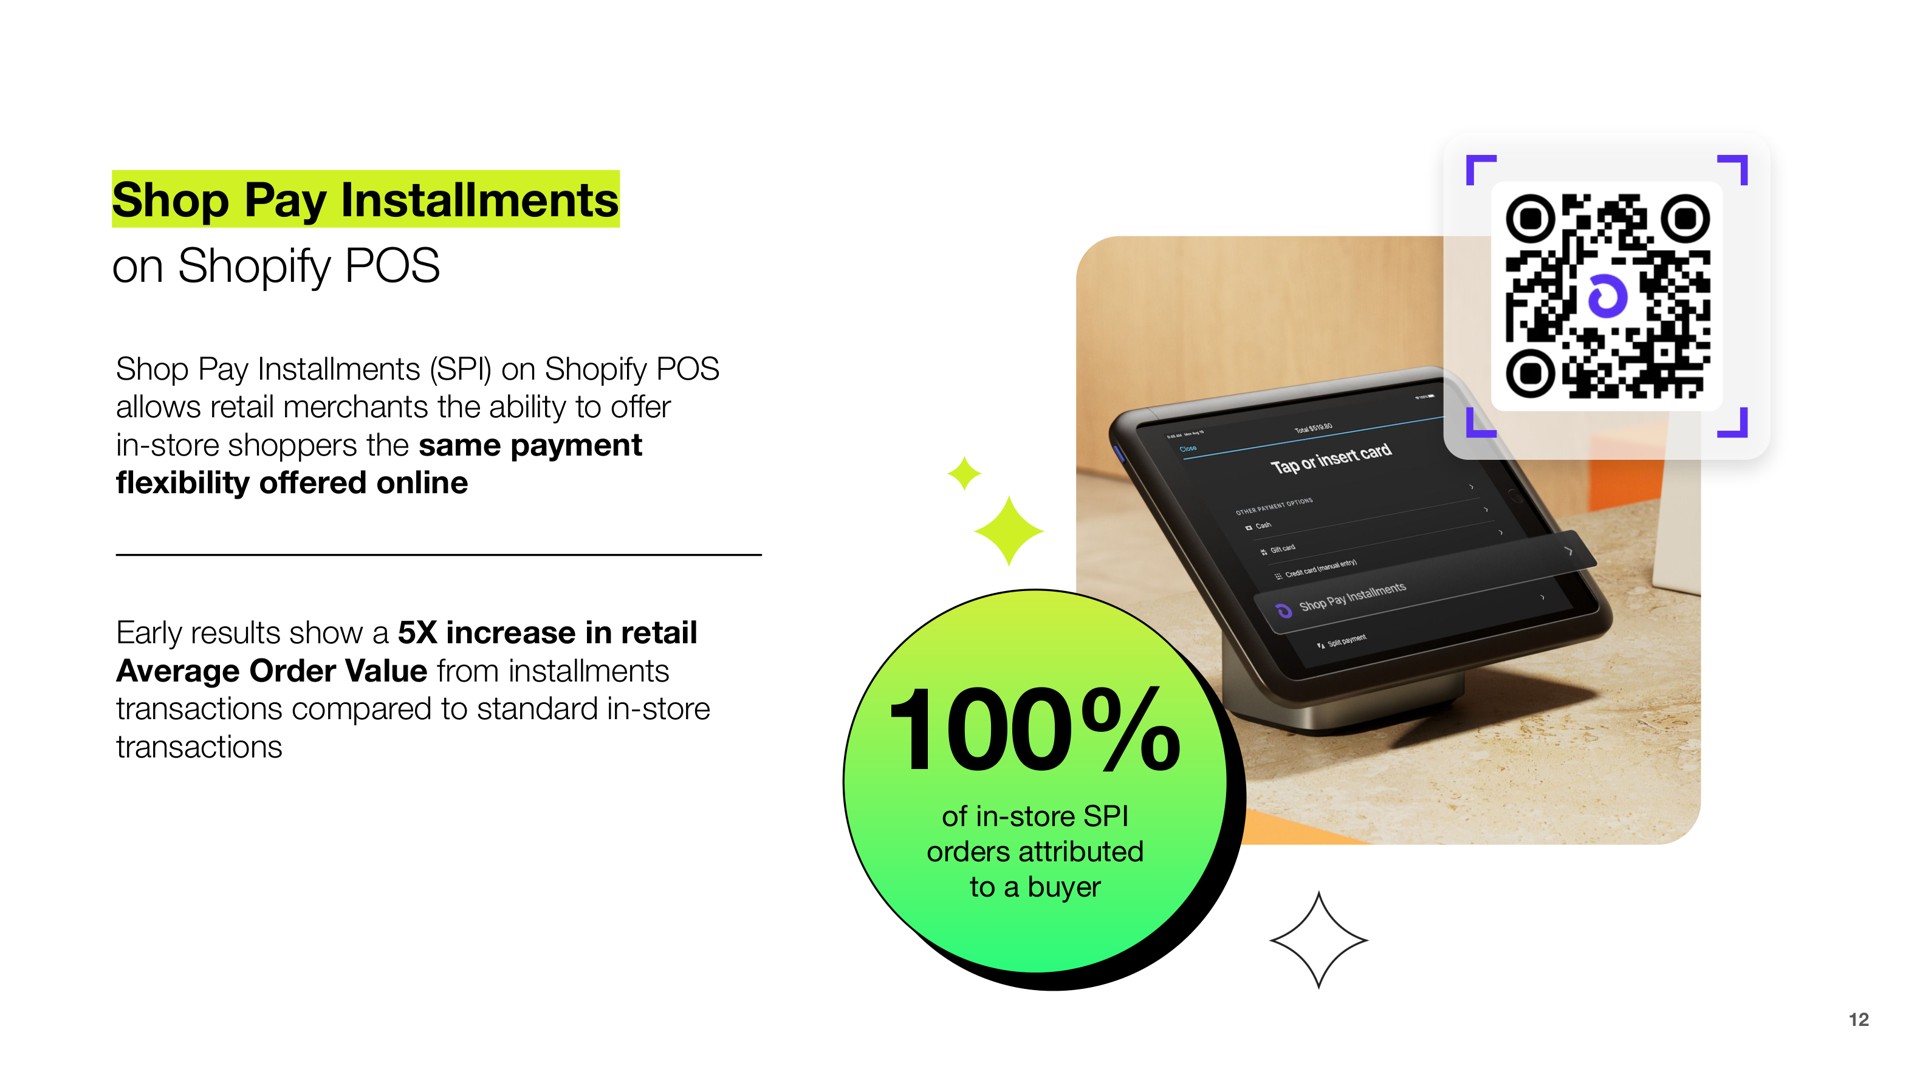 shop pay installments on pos | Shopify